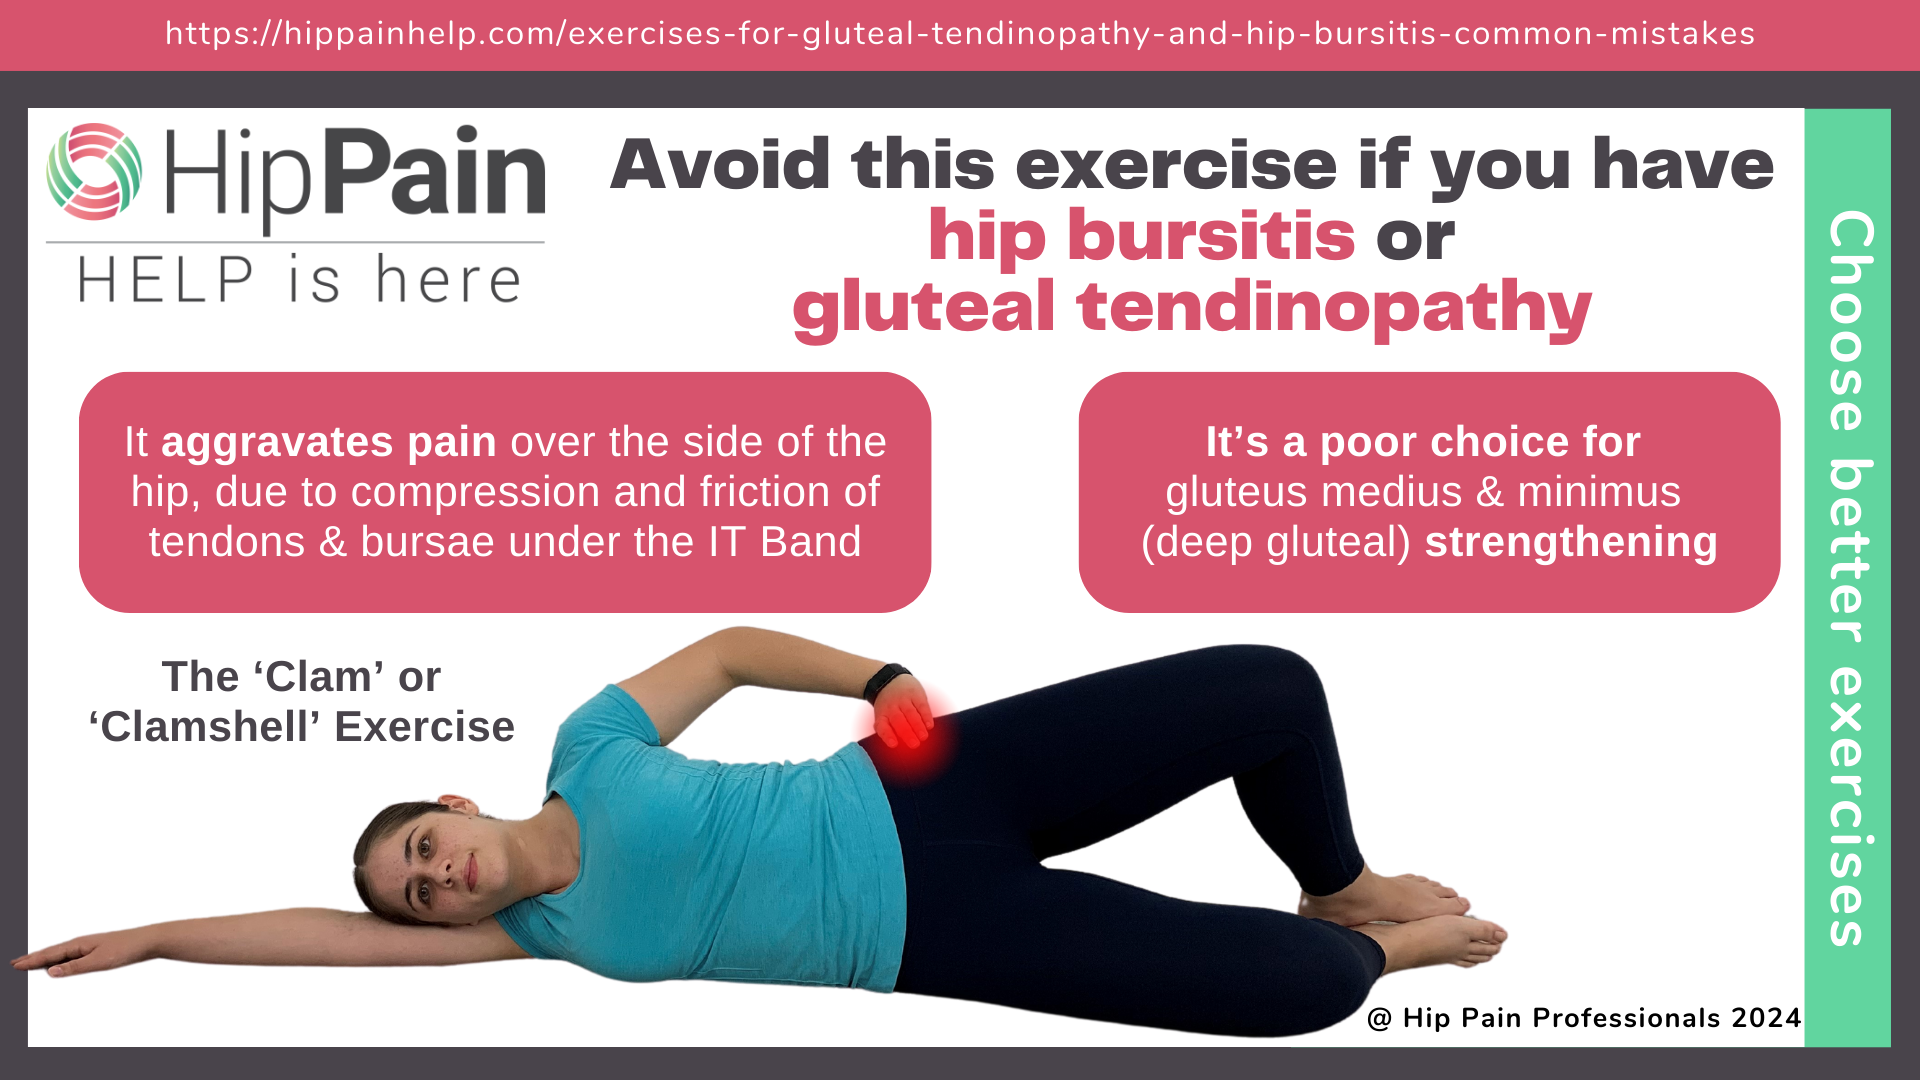 avoid-this-exercise-if-you-have-hip-bursitis-or-gluteal-tendinopathy